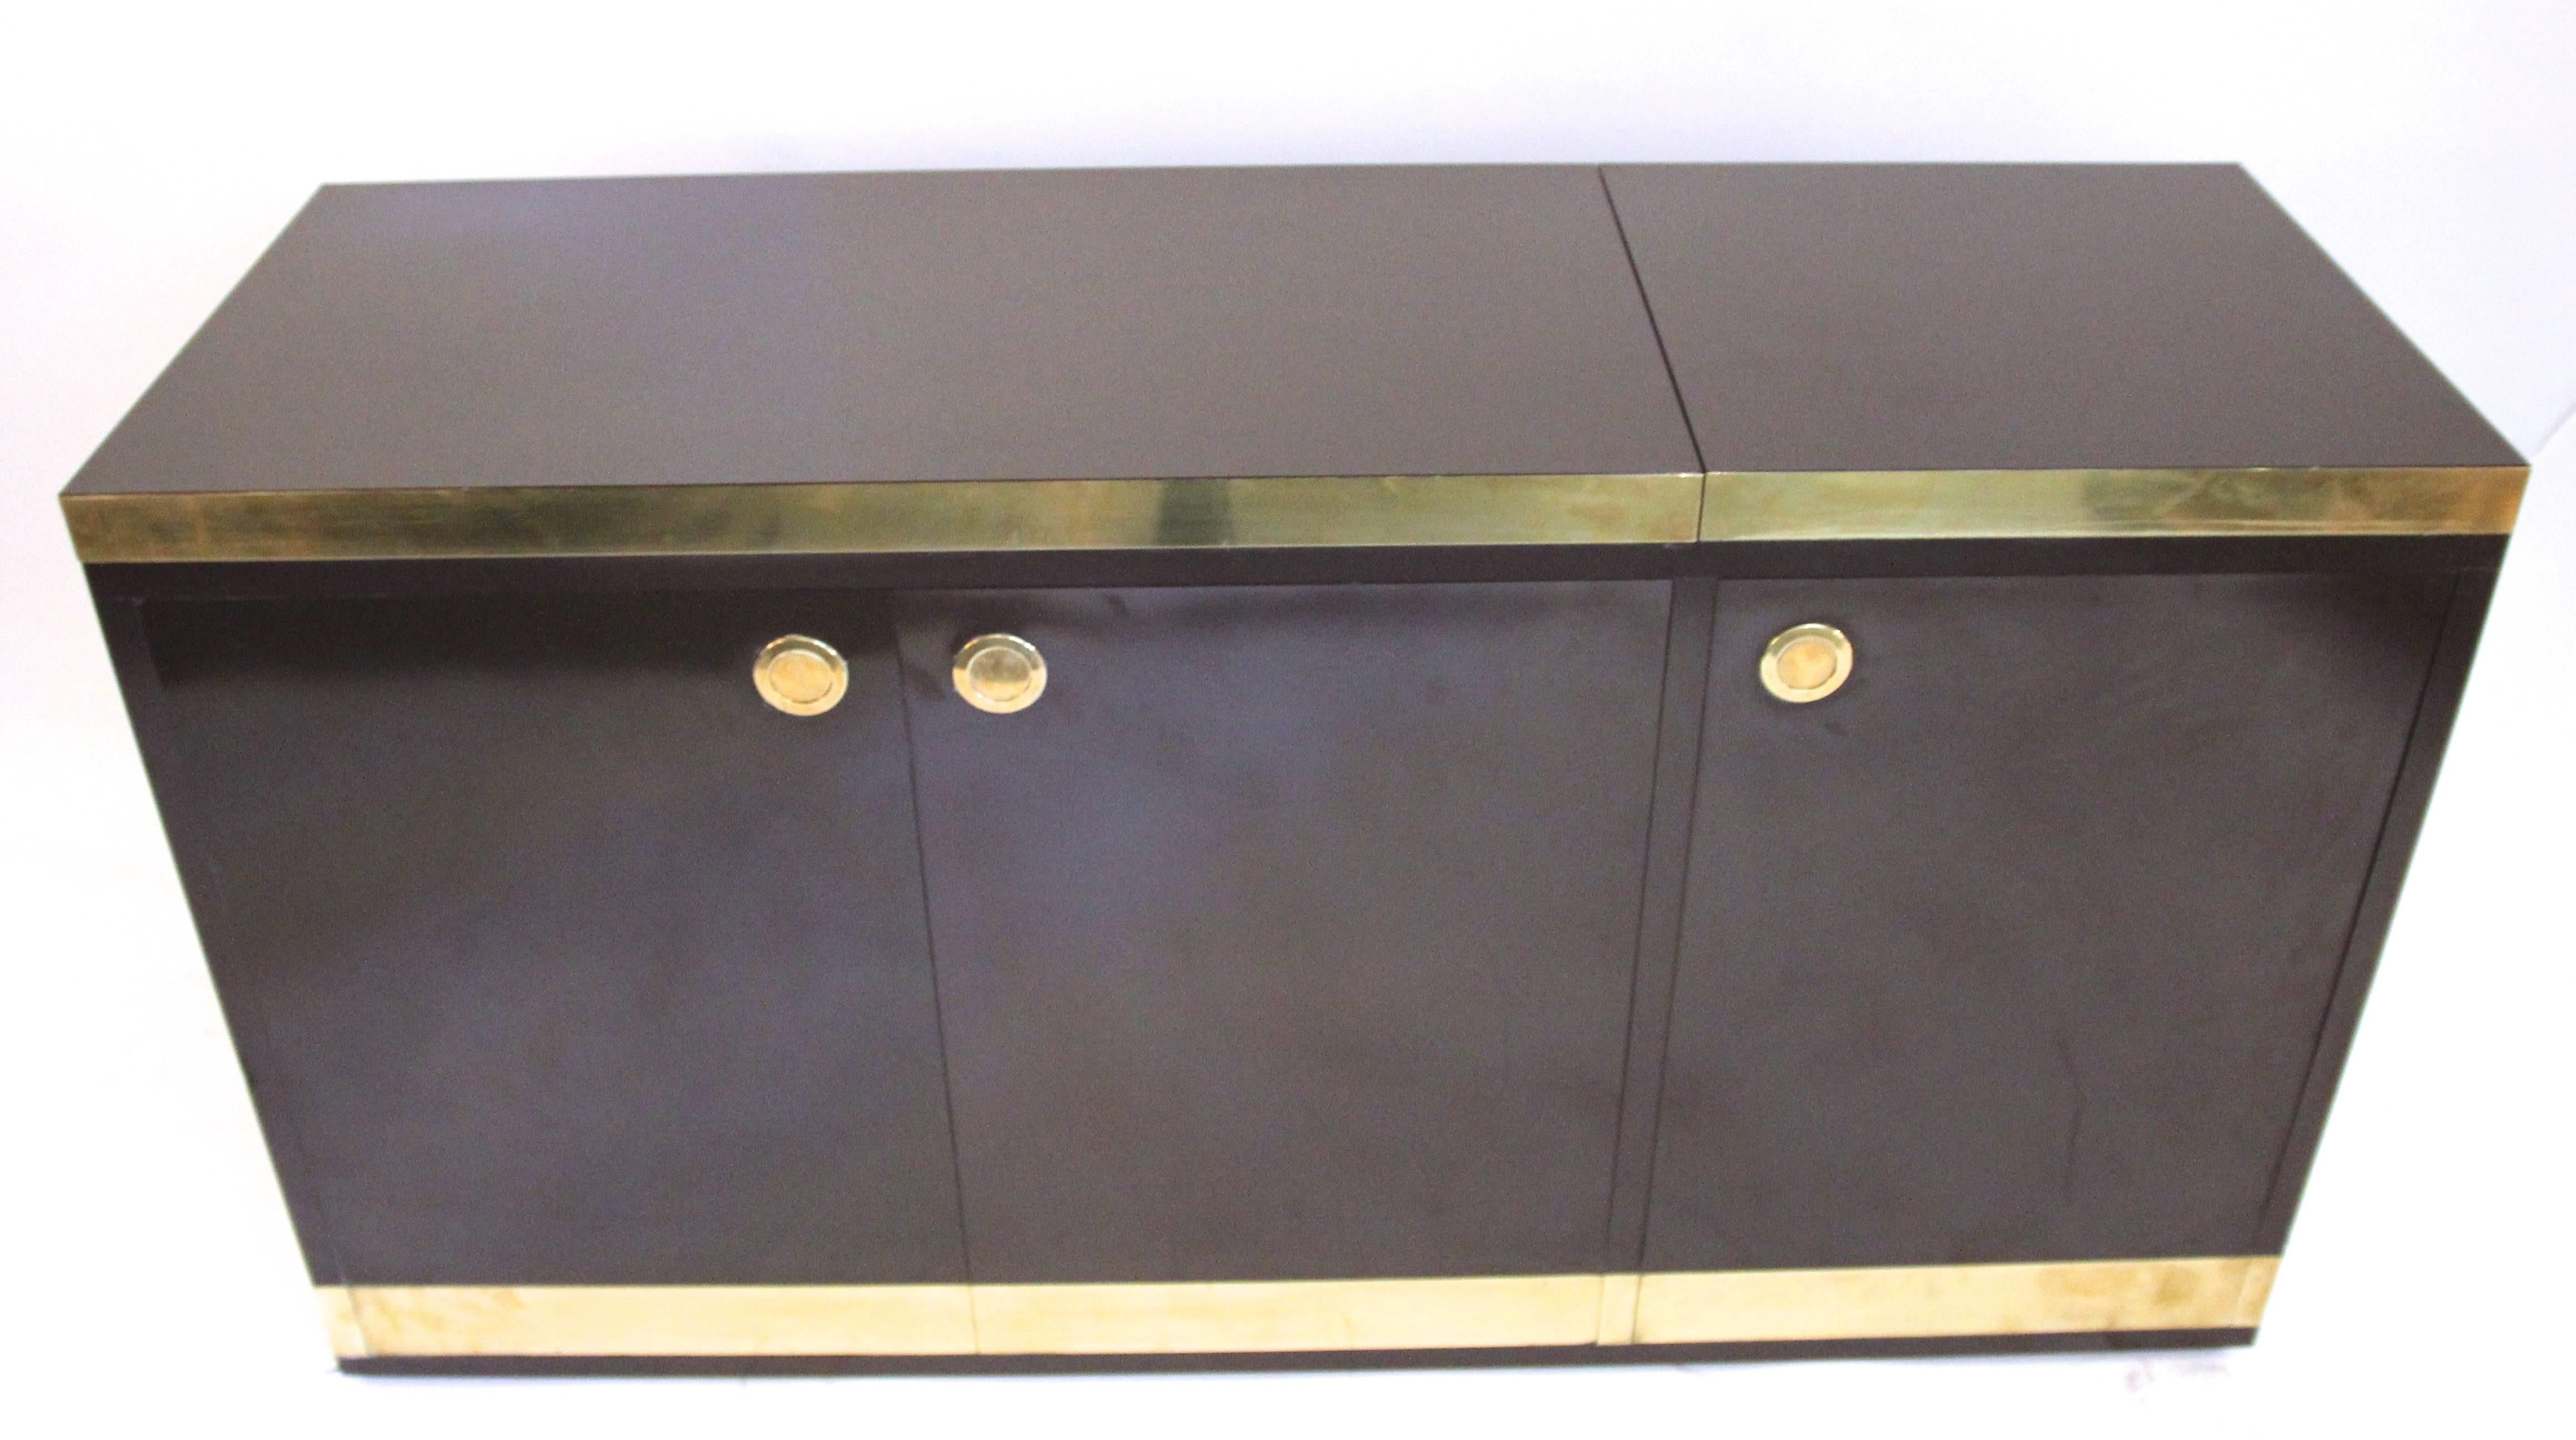 Style Willy Rizzo, sideboard with bar,
Formica and gilded brass, wooden structure,
Small splinters,
circa 1970, Italy.
Measures: Height 72 cm, width 135 cm, depth 45 cm.